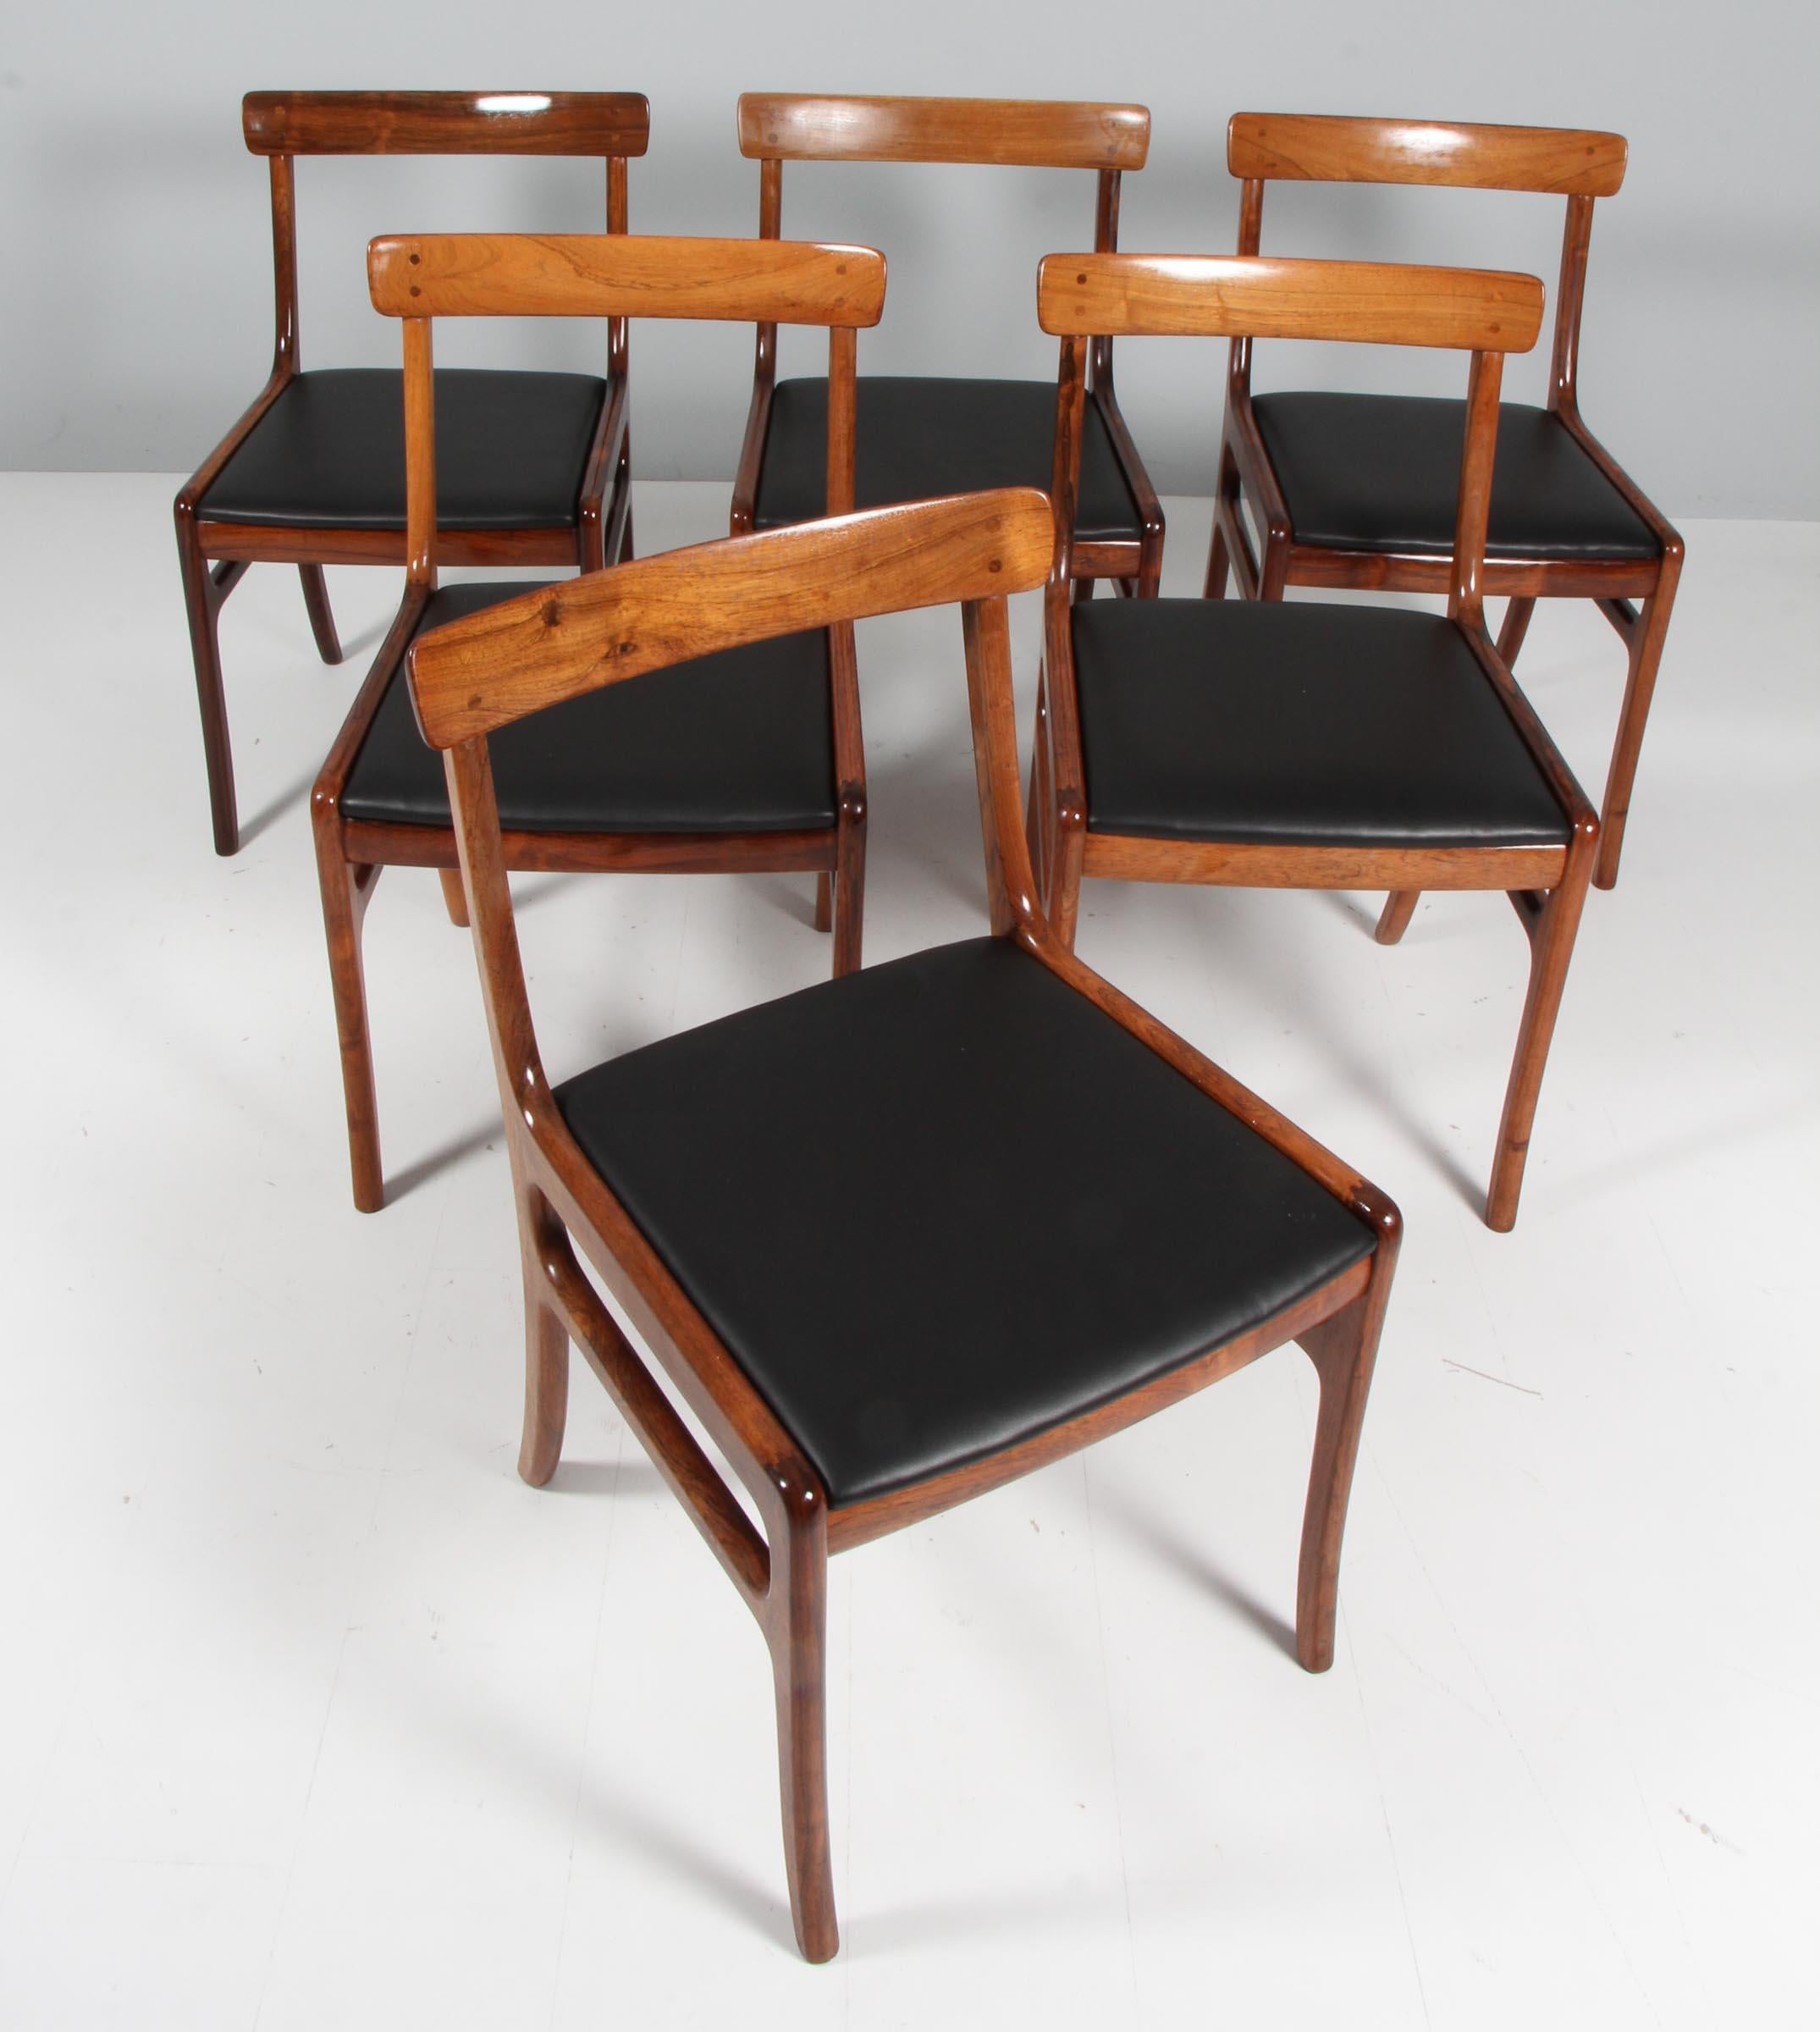 Ole Wanscher set of six Rungstedlun dining chairs in rosewood.

New upholstered with black aniline leather.

Model Rungstedlund, made by Poul Jeppesen.

